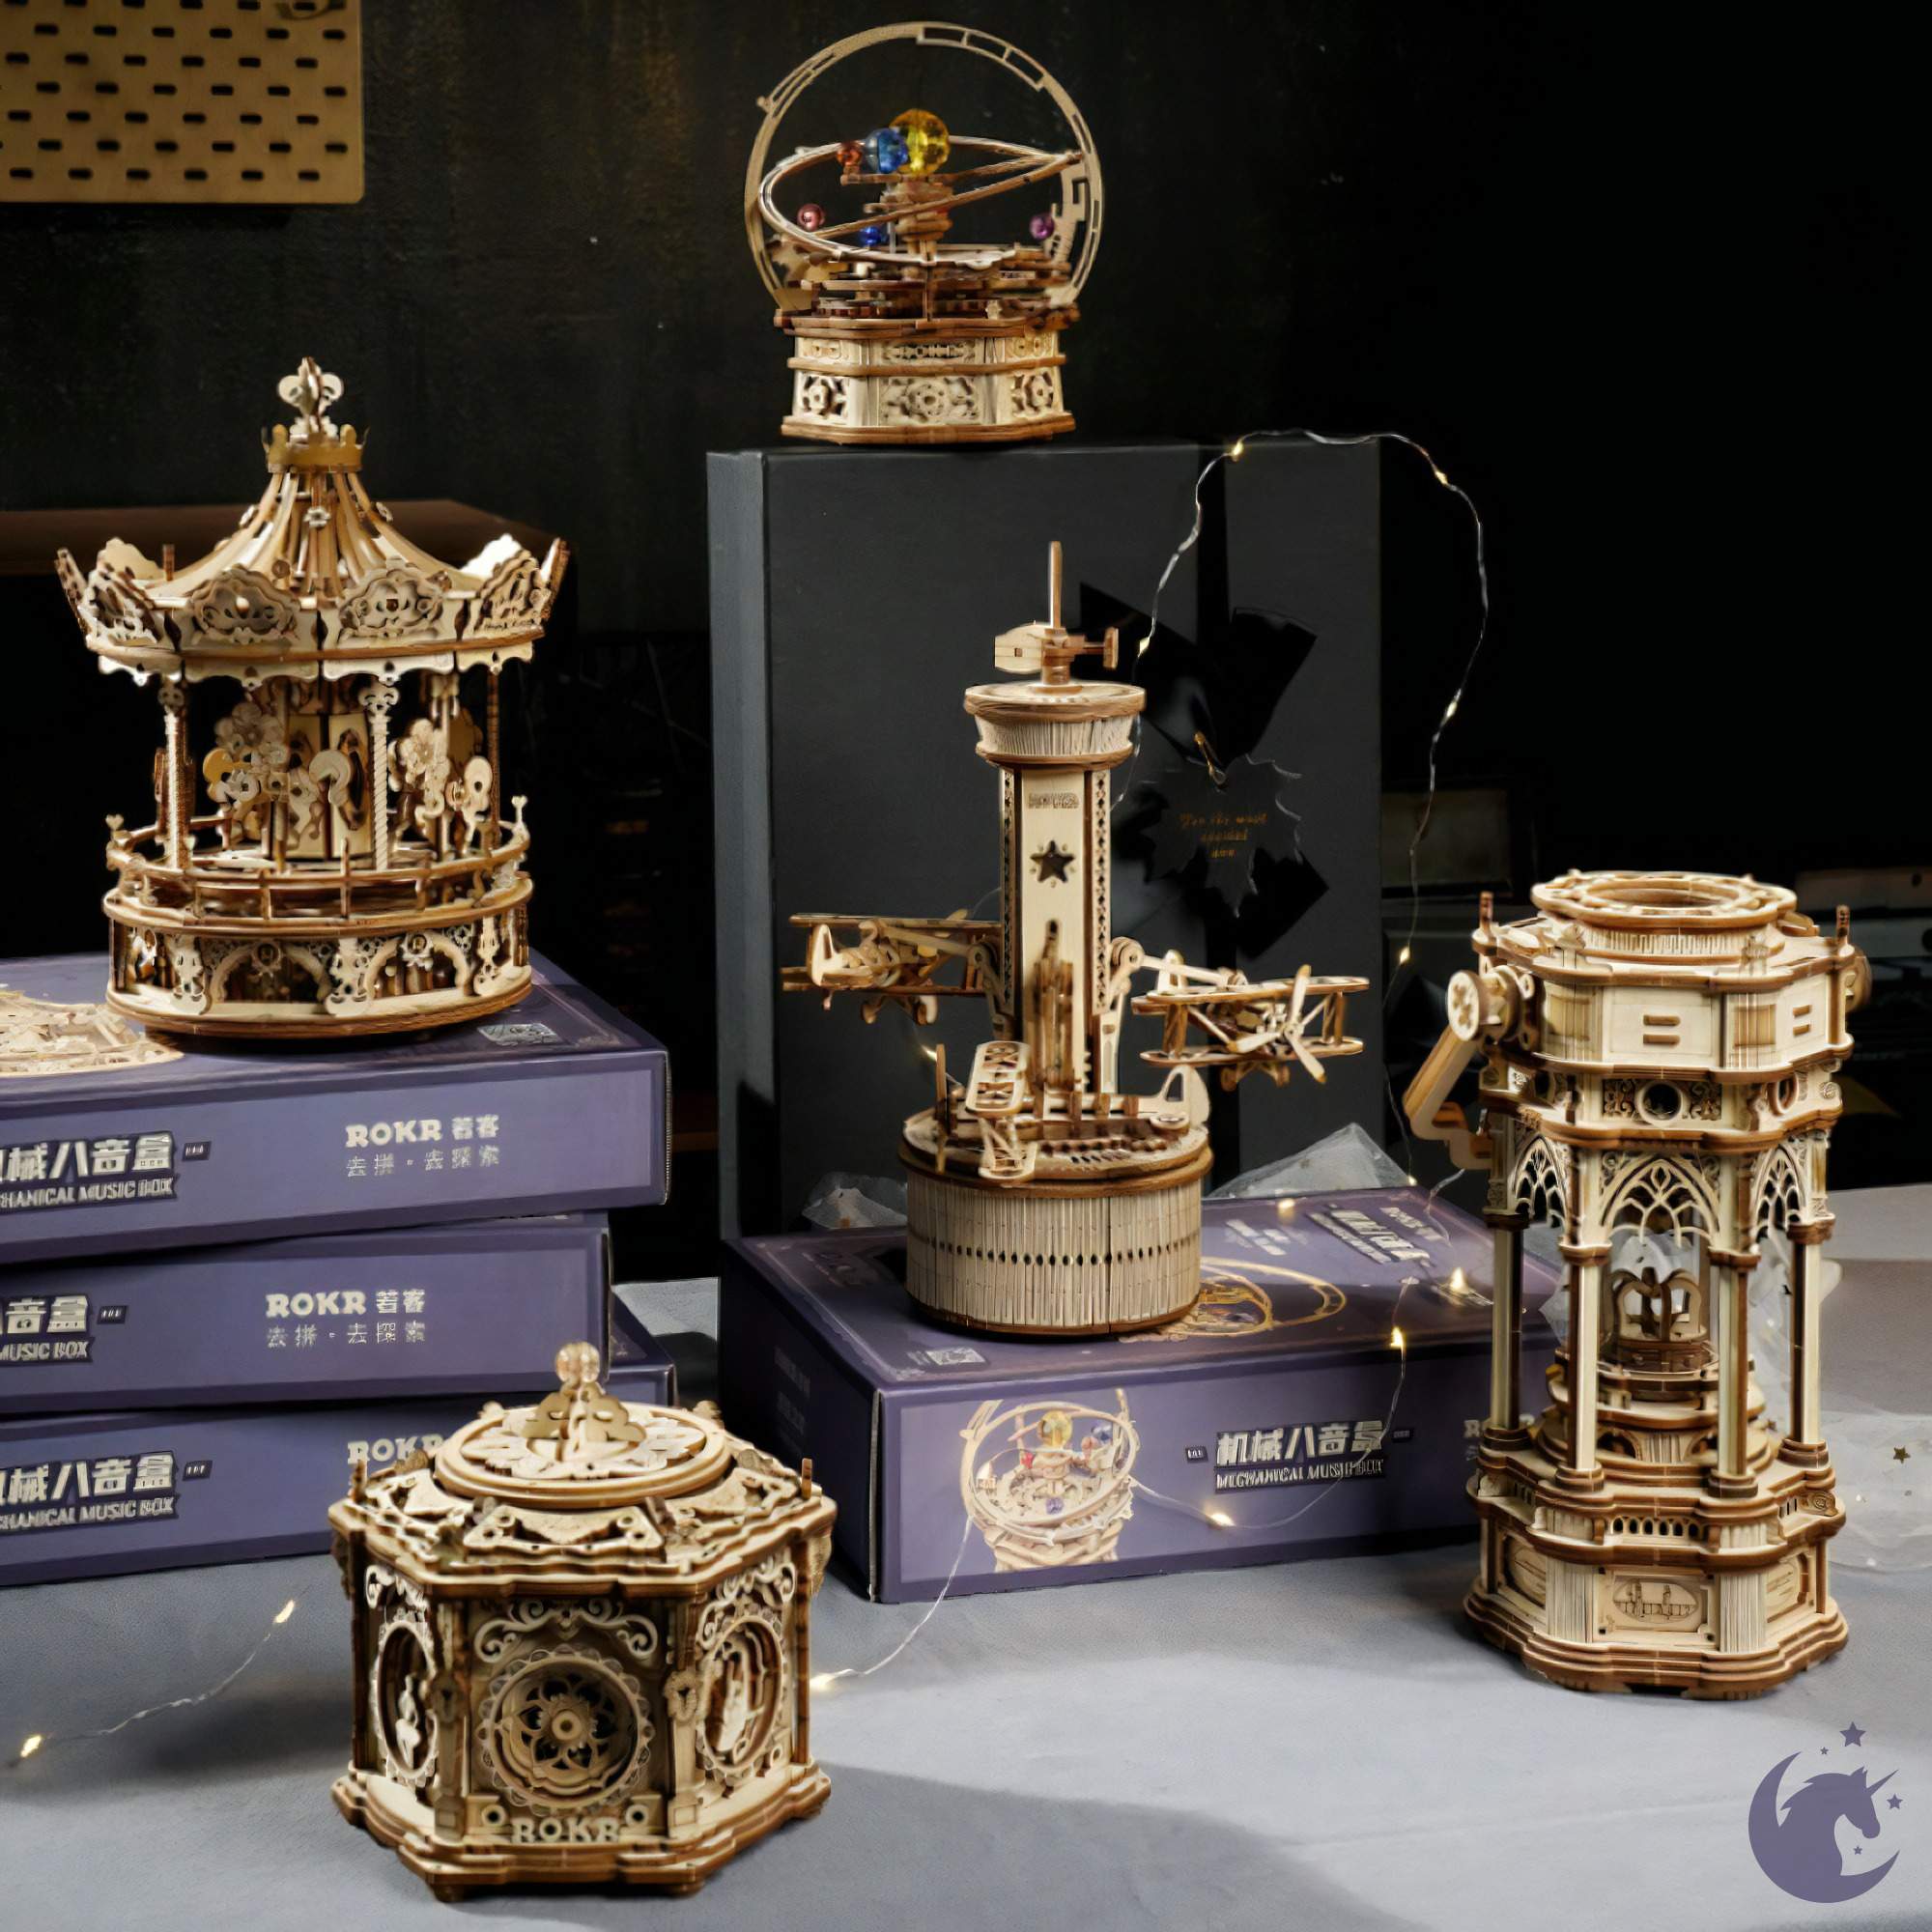 Brand new Mechanical Music Box Collection!